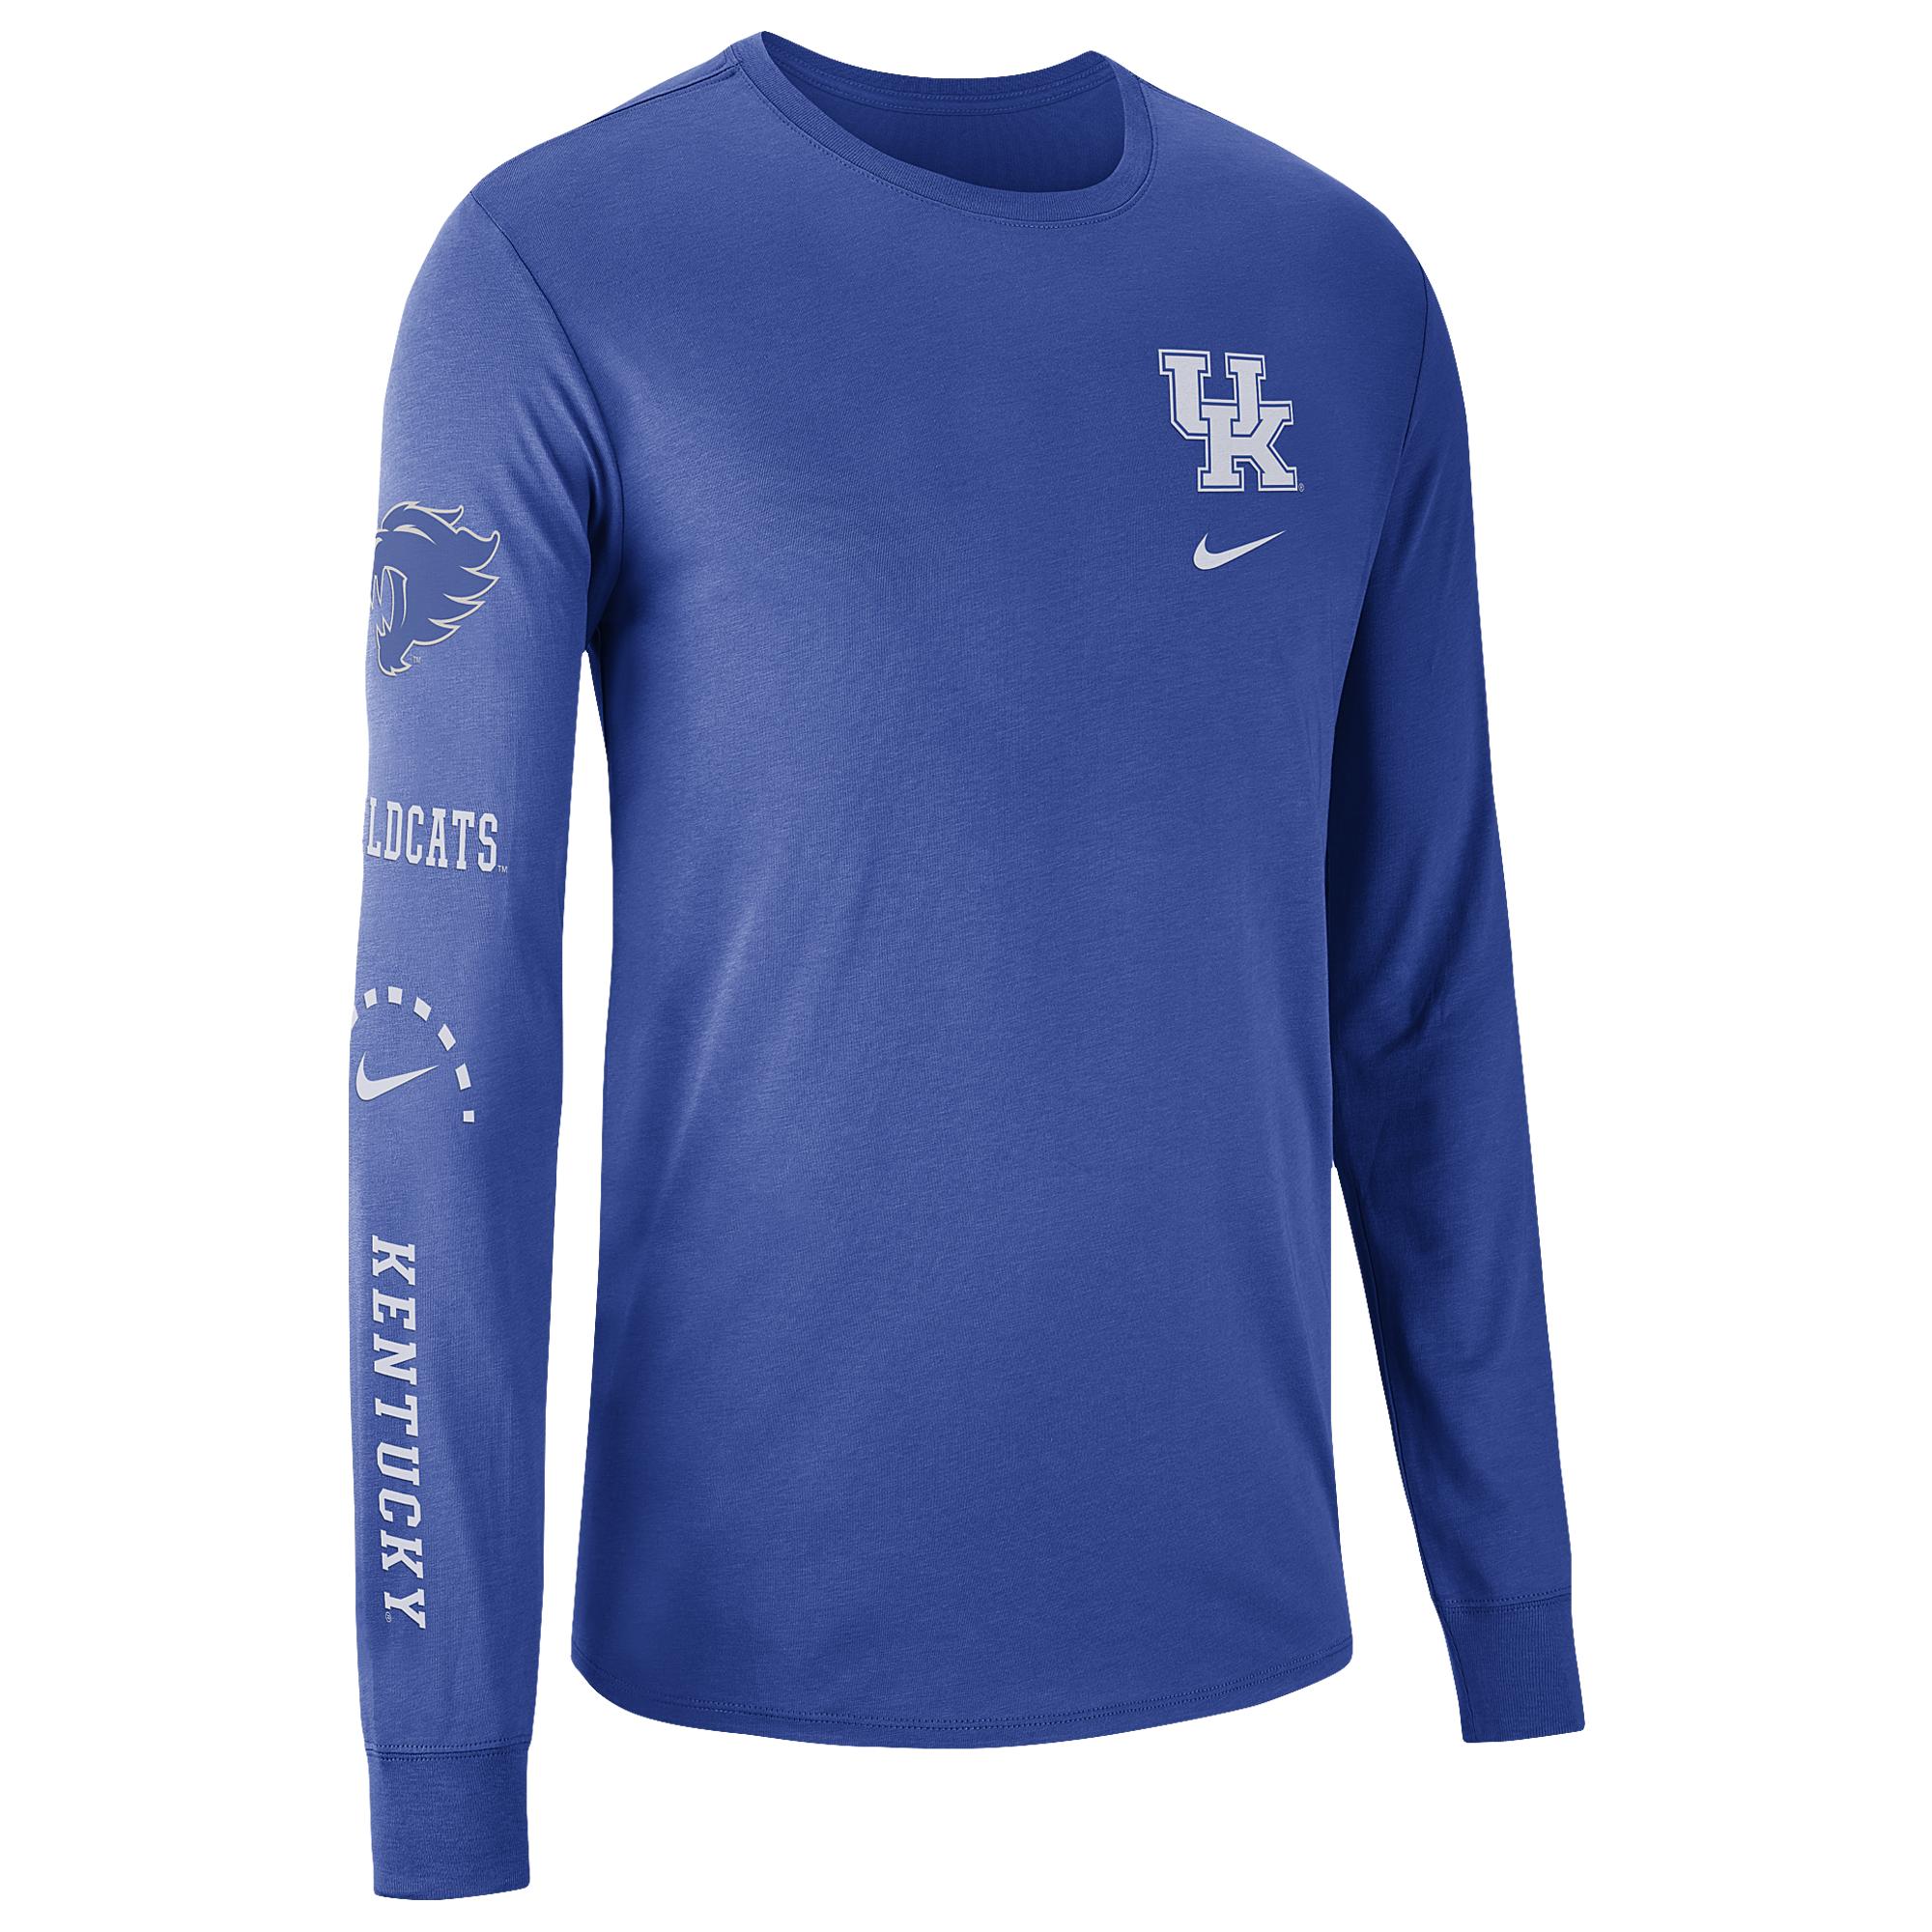 Nike College Df Cotton Long Sleeve Elevate T-shirt in Blue for Men - Lyst